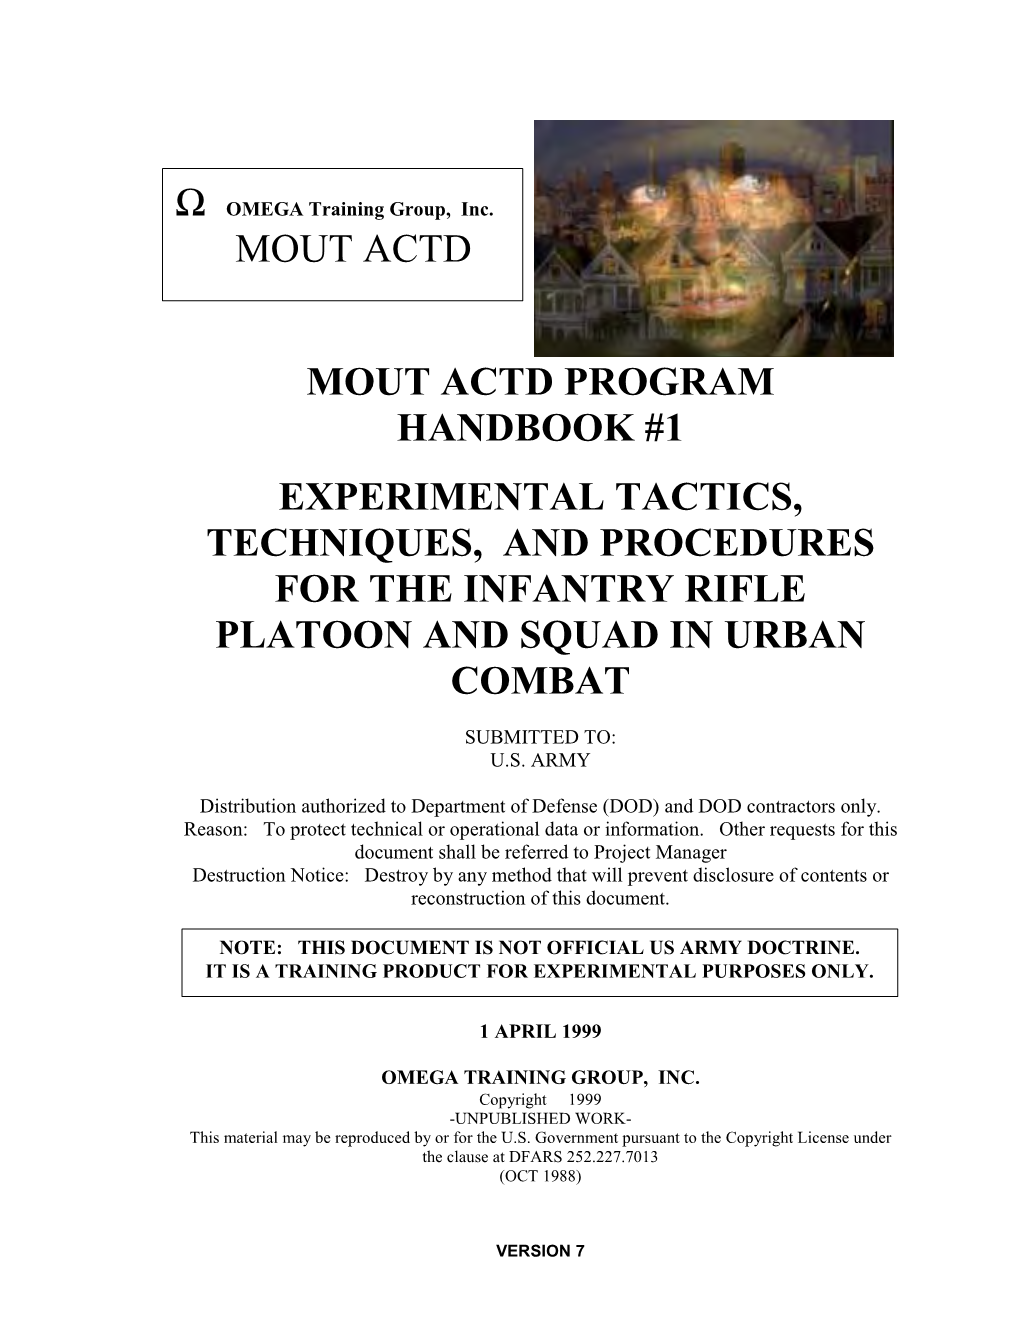 Mout Actd Program Handbook #1 Experimental Tactics, Techniques, and Procedures for the Infantry Rifle Platoon and Squad in Urban Combat